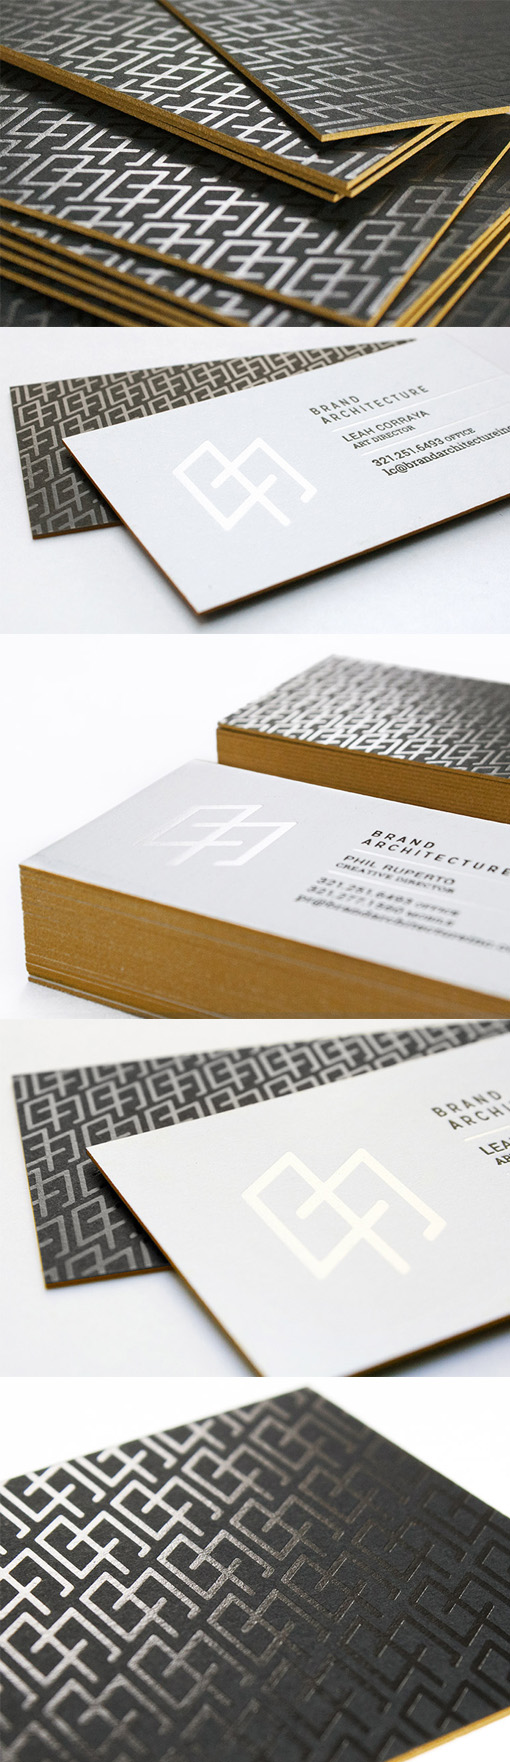 Sleek Foil Embossed Black And White Business Card Design For An Architect